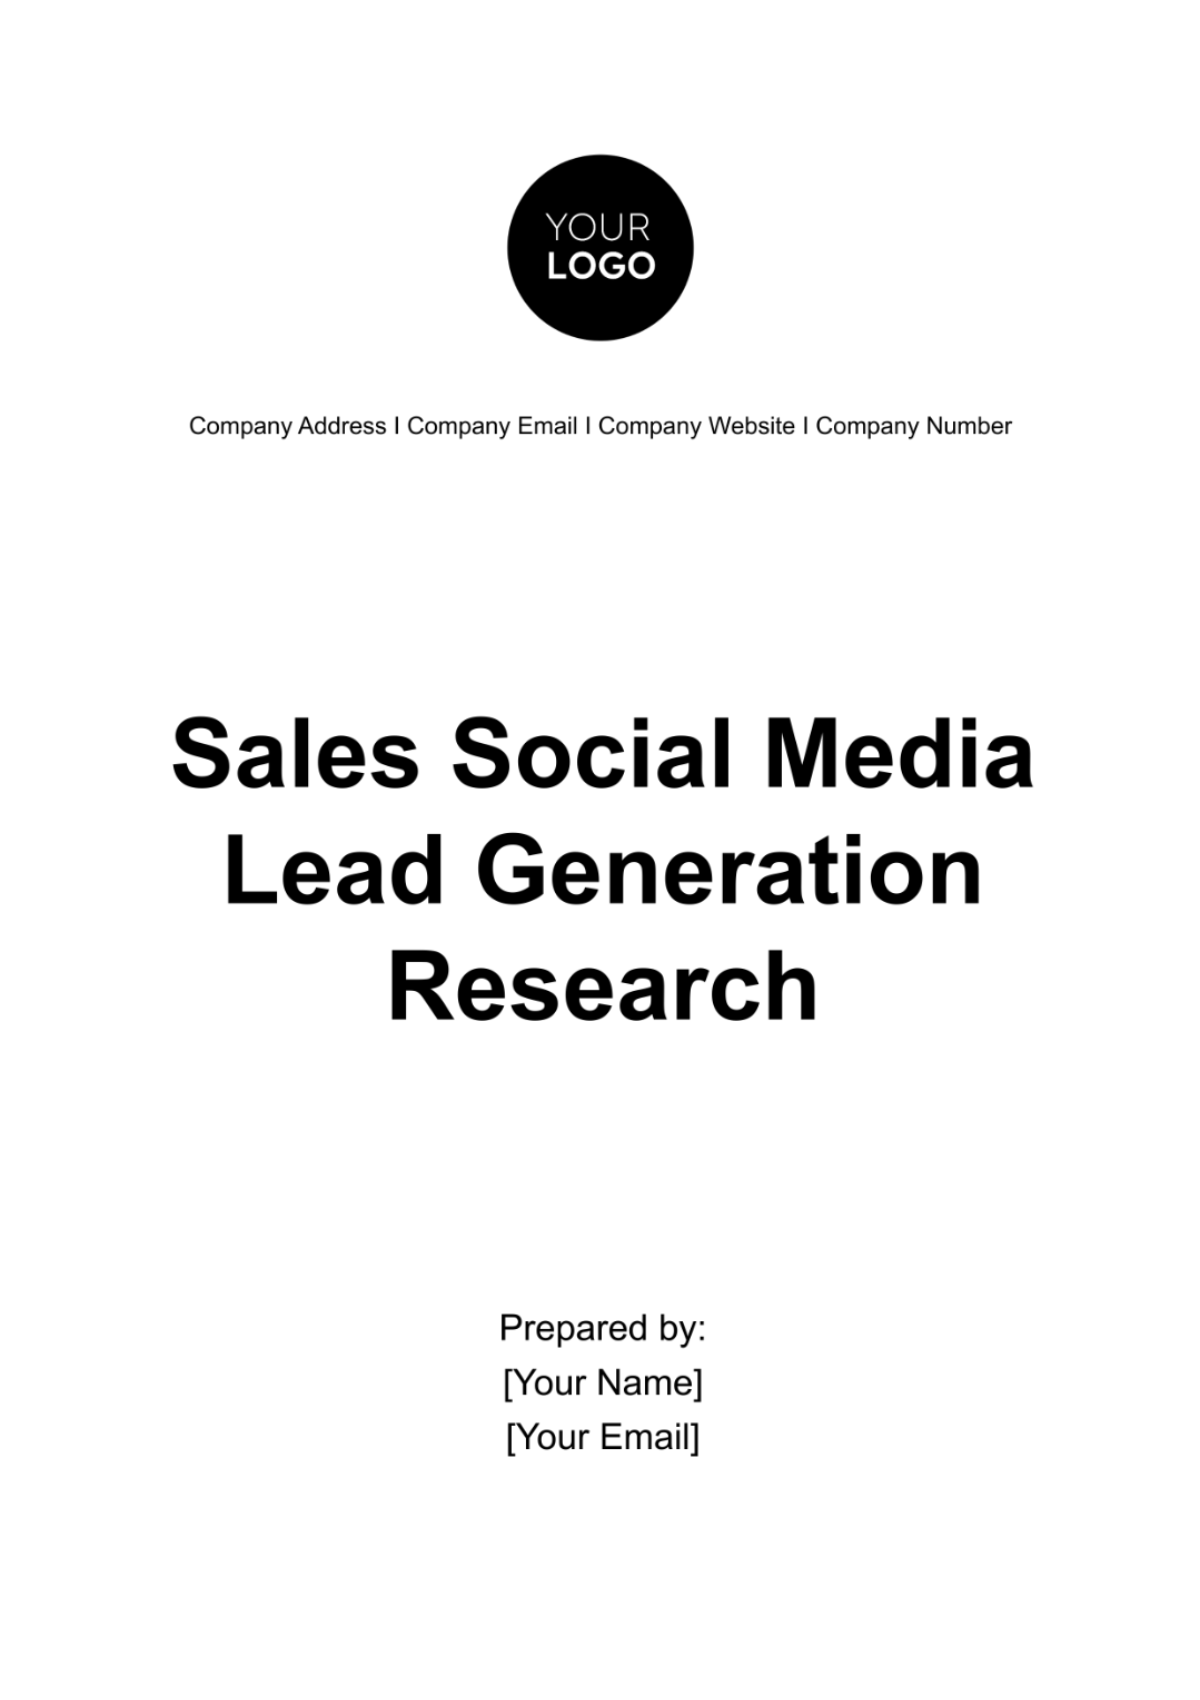 Sales Social Media Lead Generation Research Template